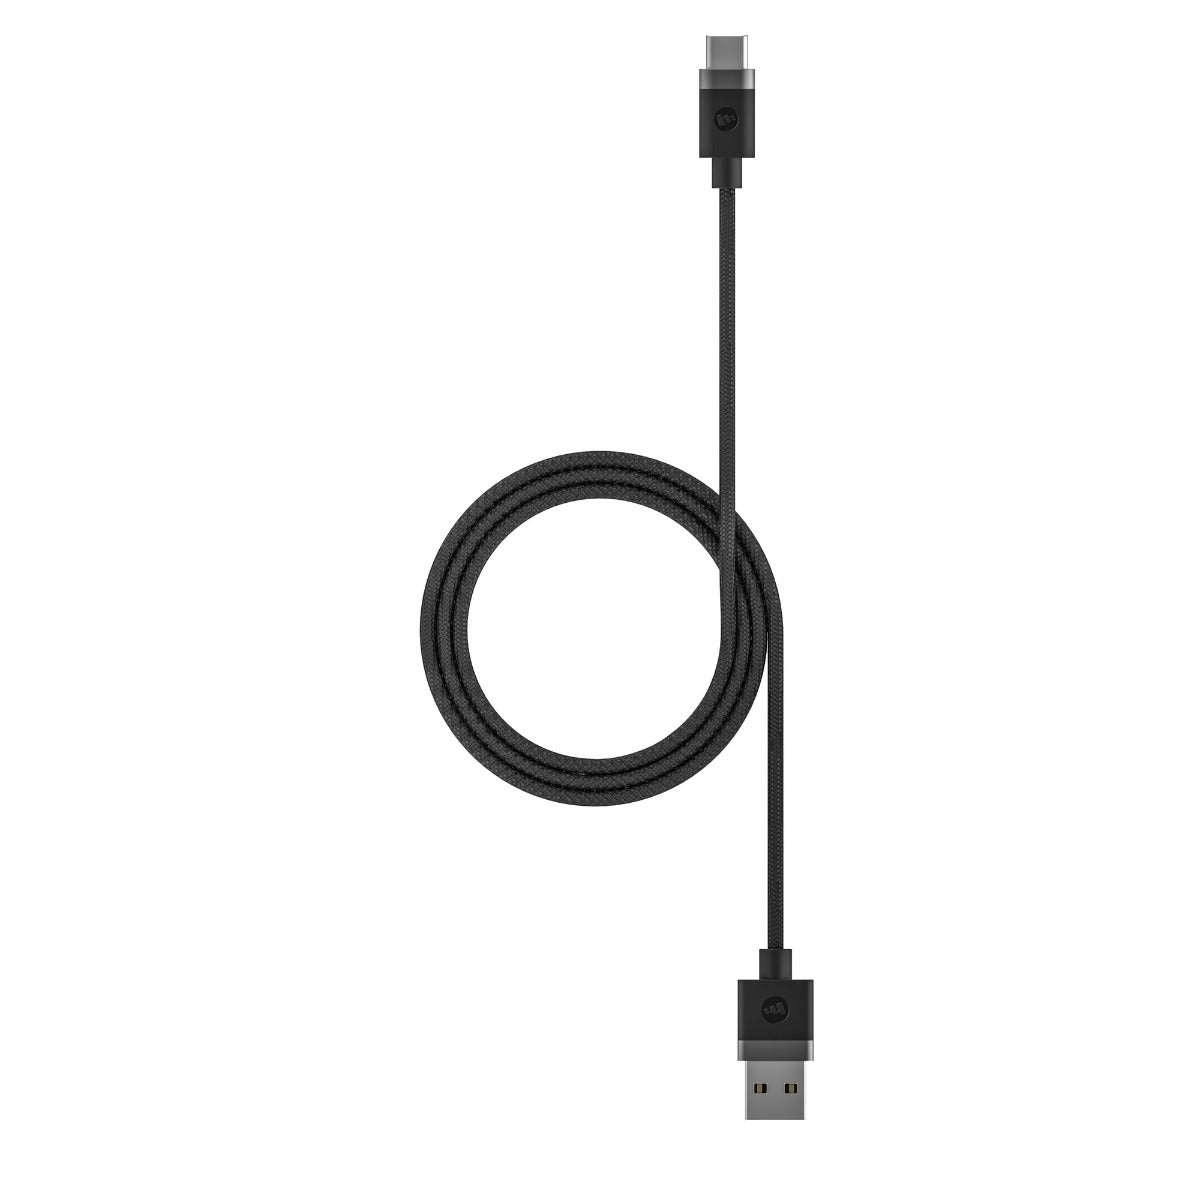 USB-A Cable with USB-C Connector